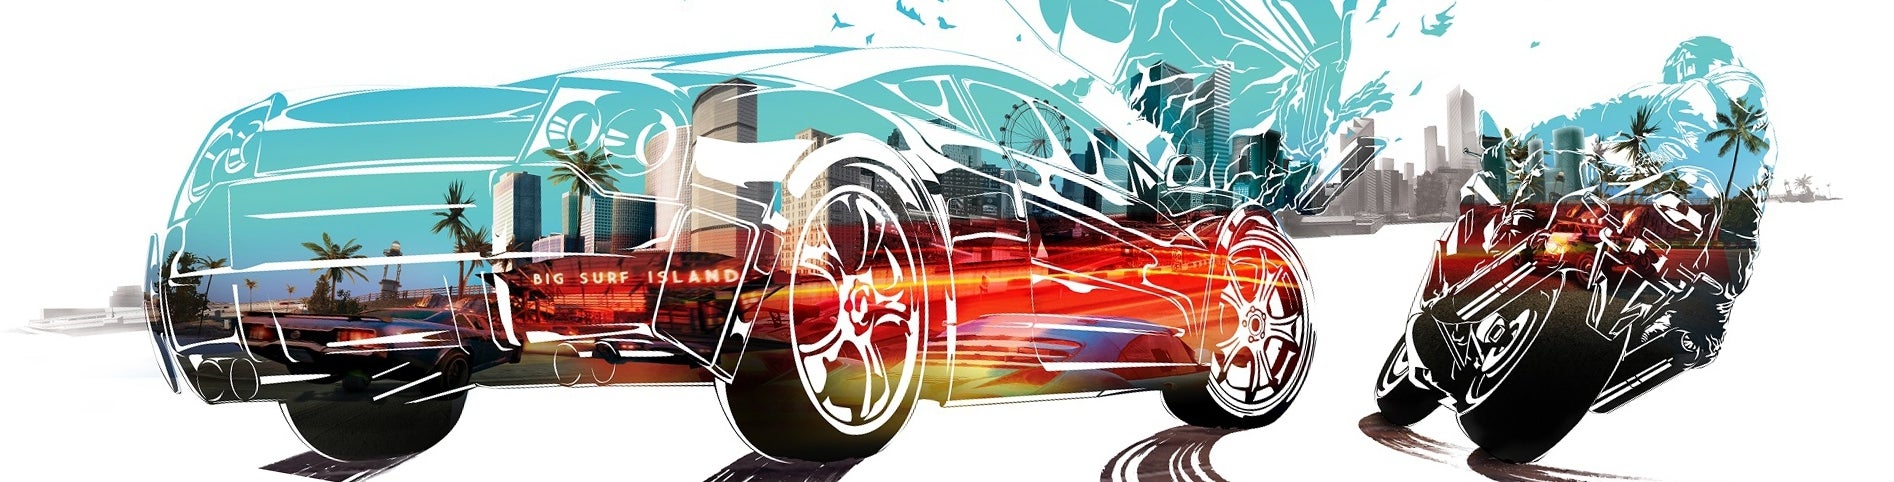 Image for Burnout Paradise Remastered is more than just a PC port